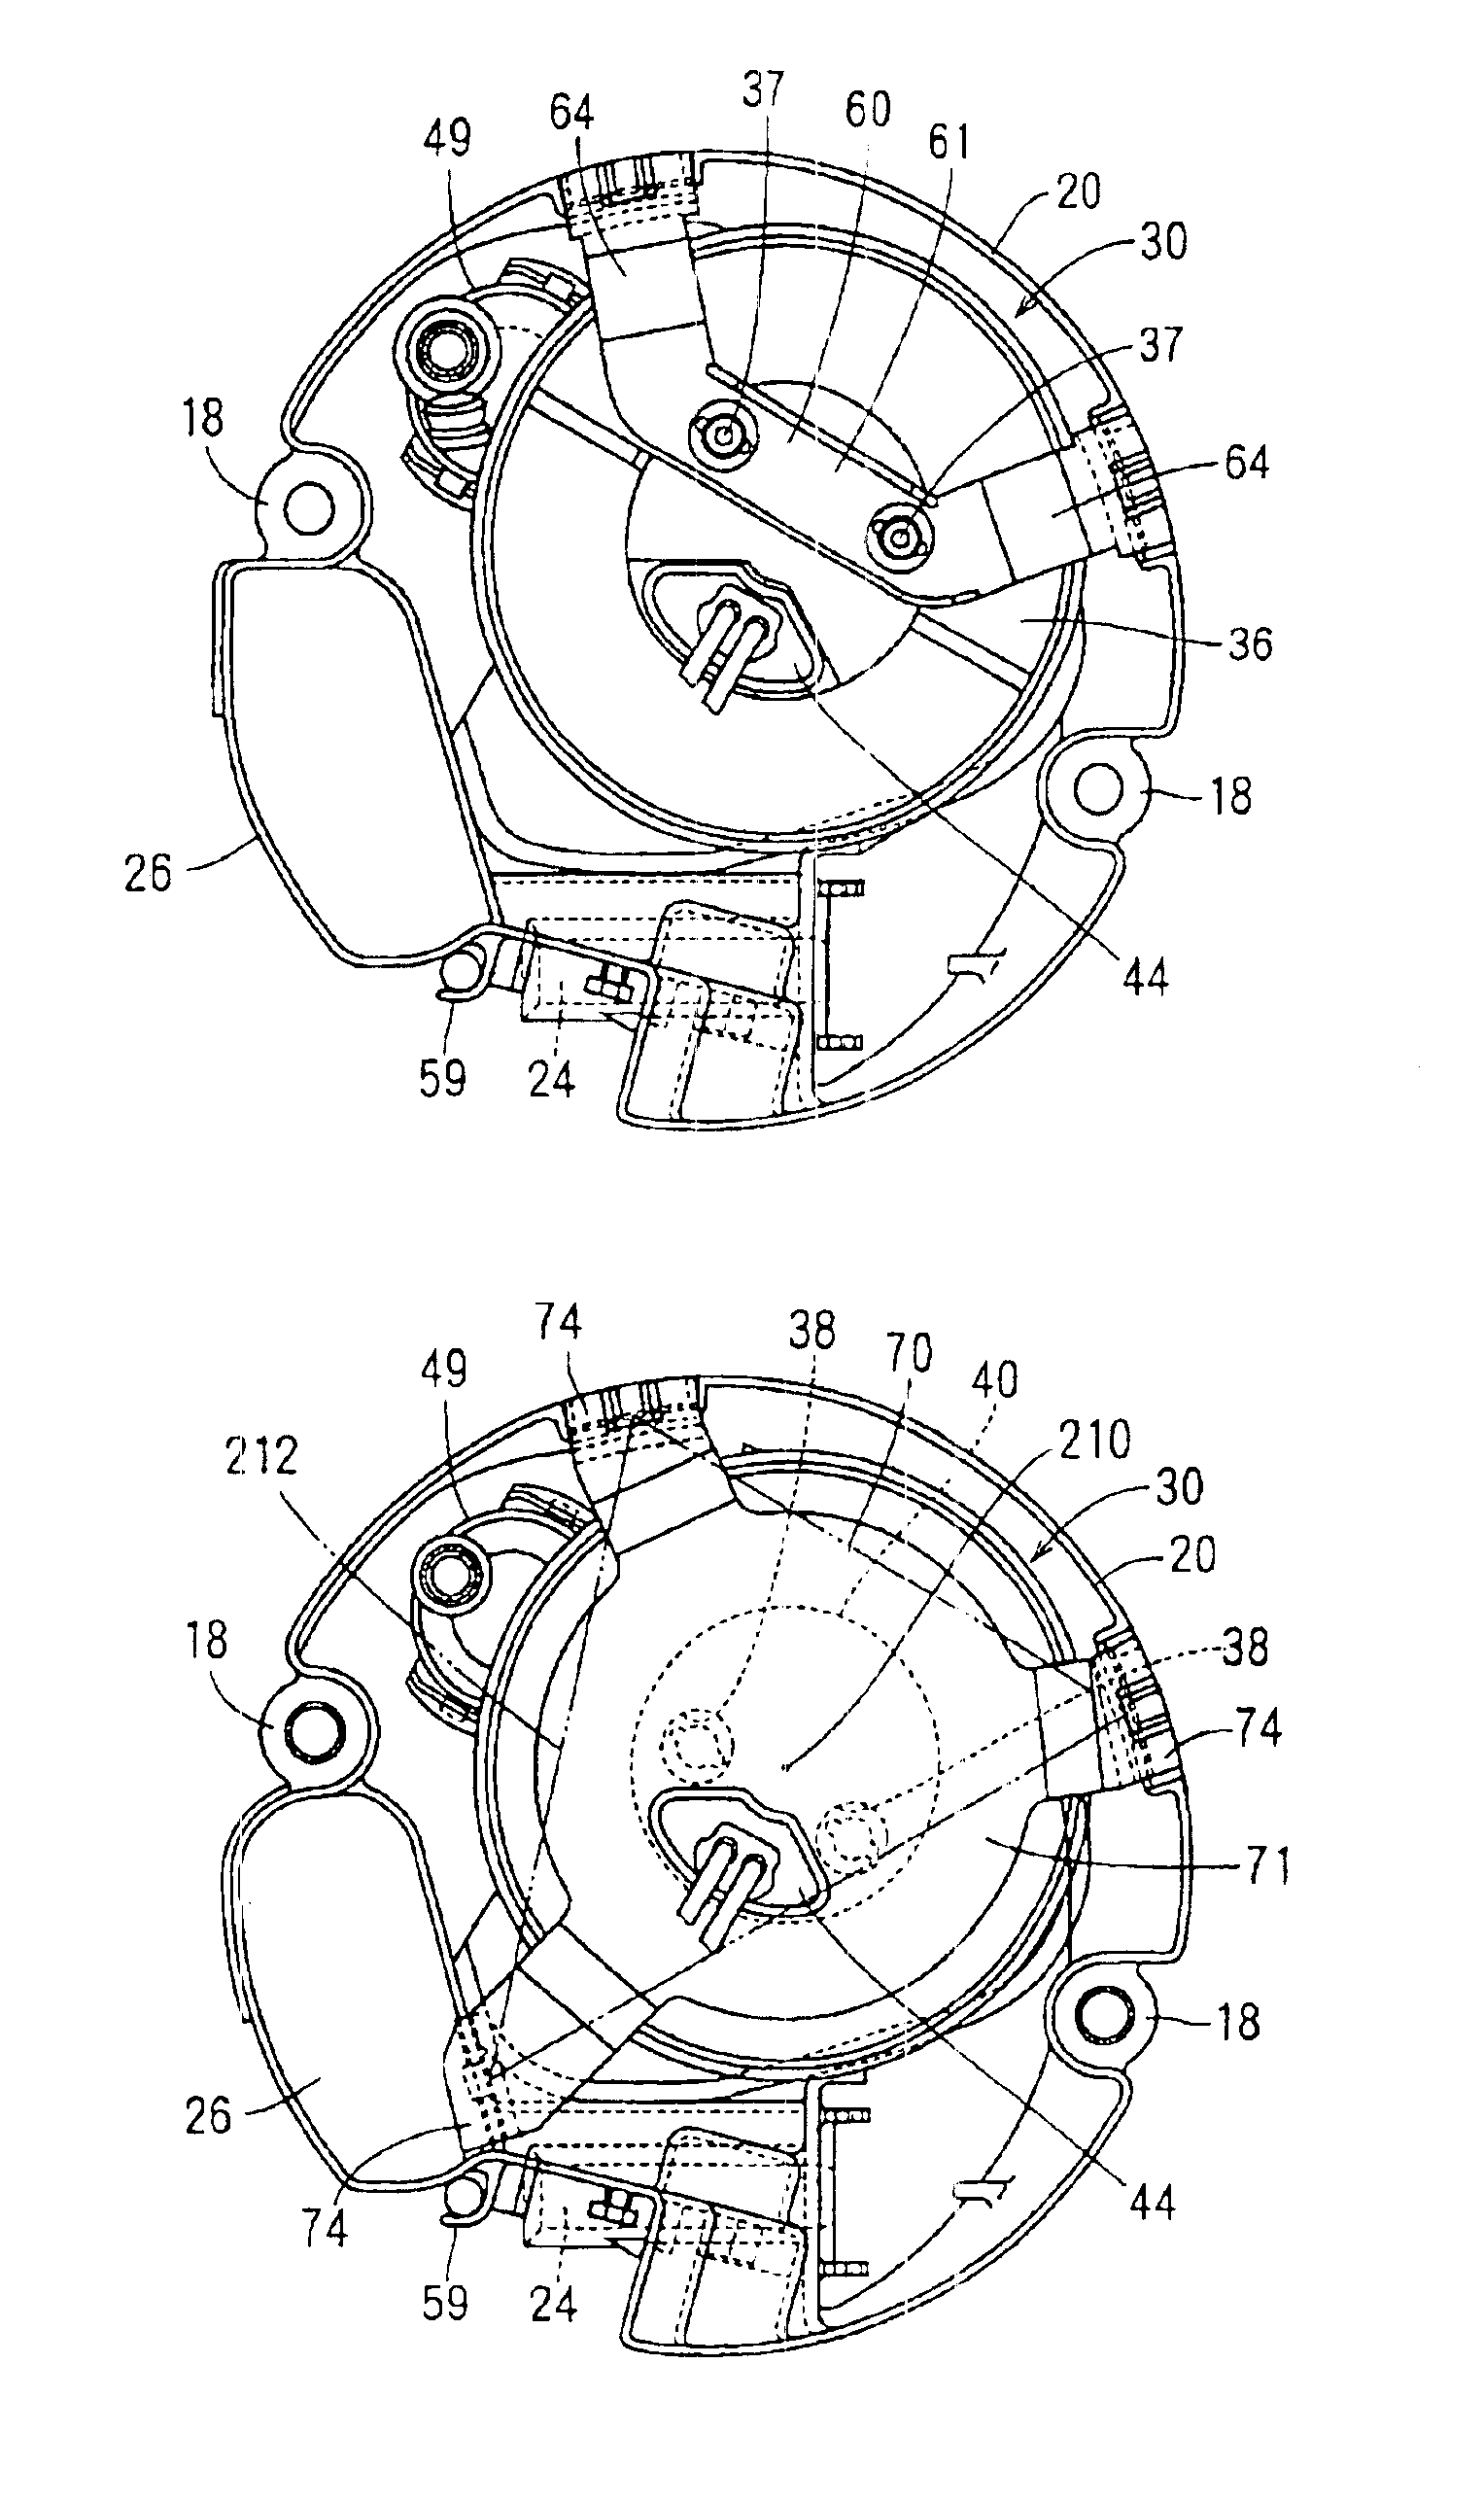 Fuel feed apparatus having vibration damping structure